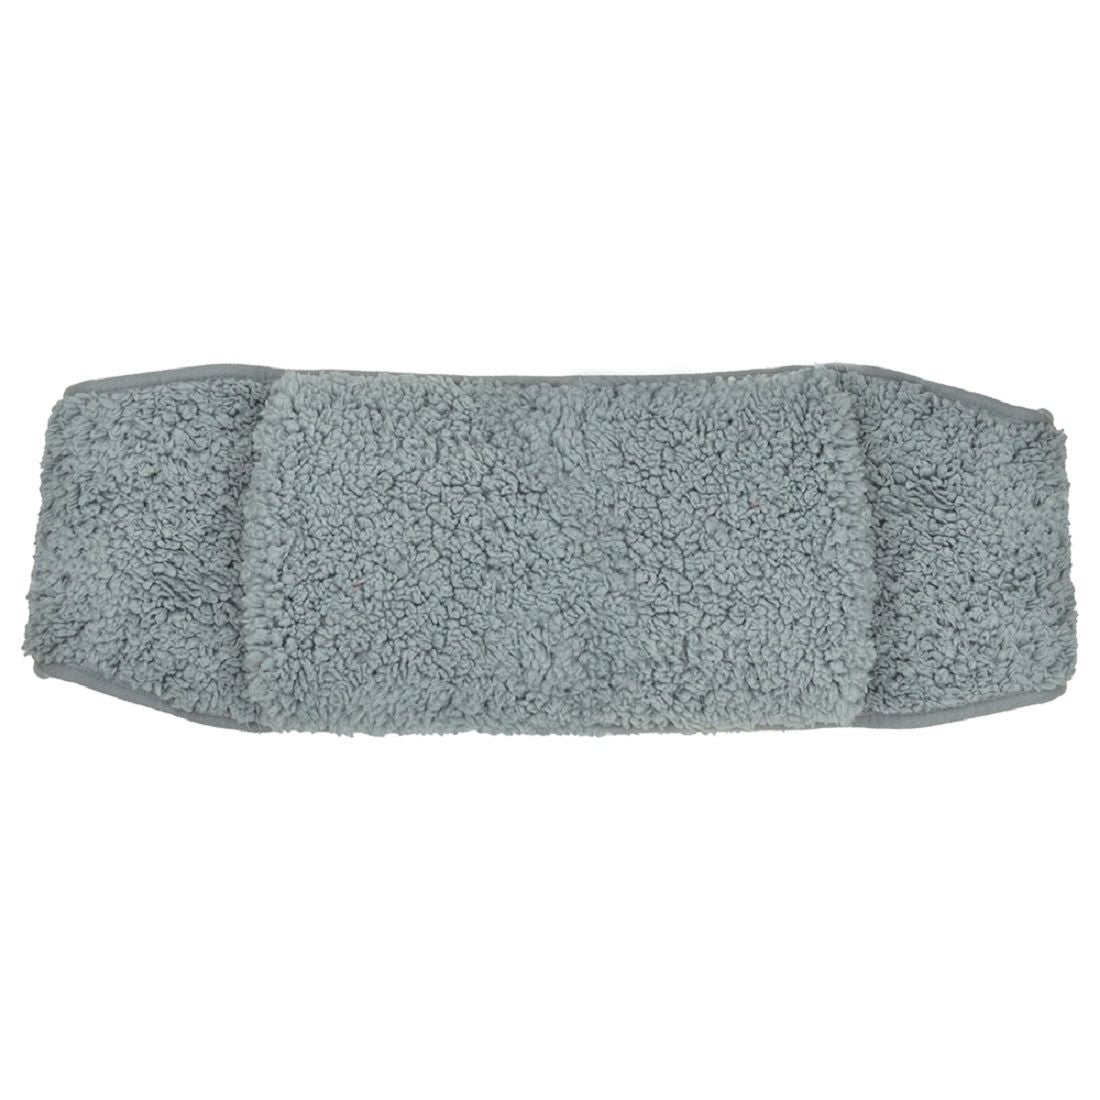 1L Hot Water Bottle with Wrap Around Grey Teddy Fleece Cover